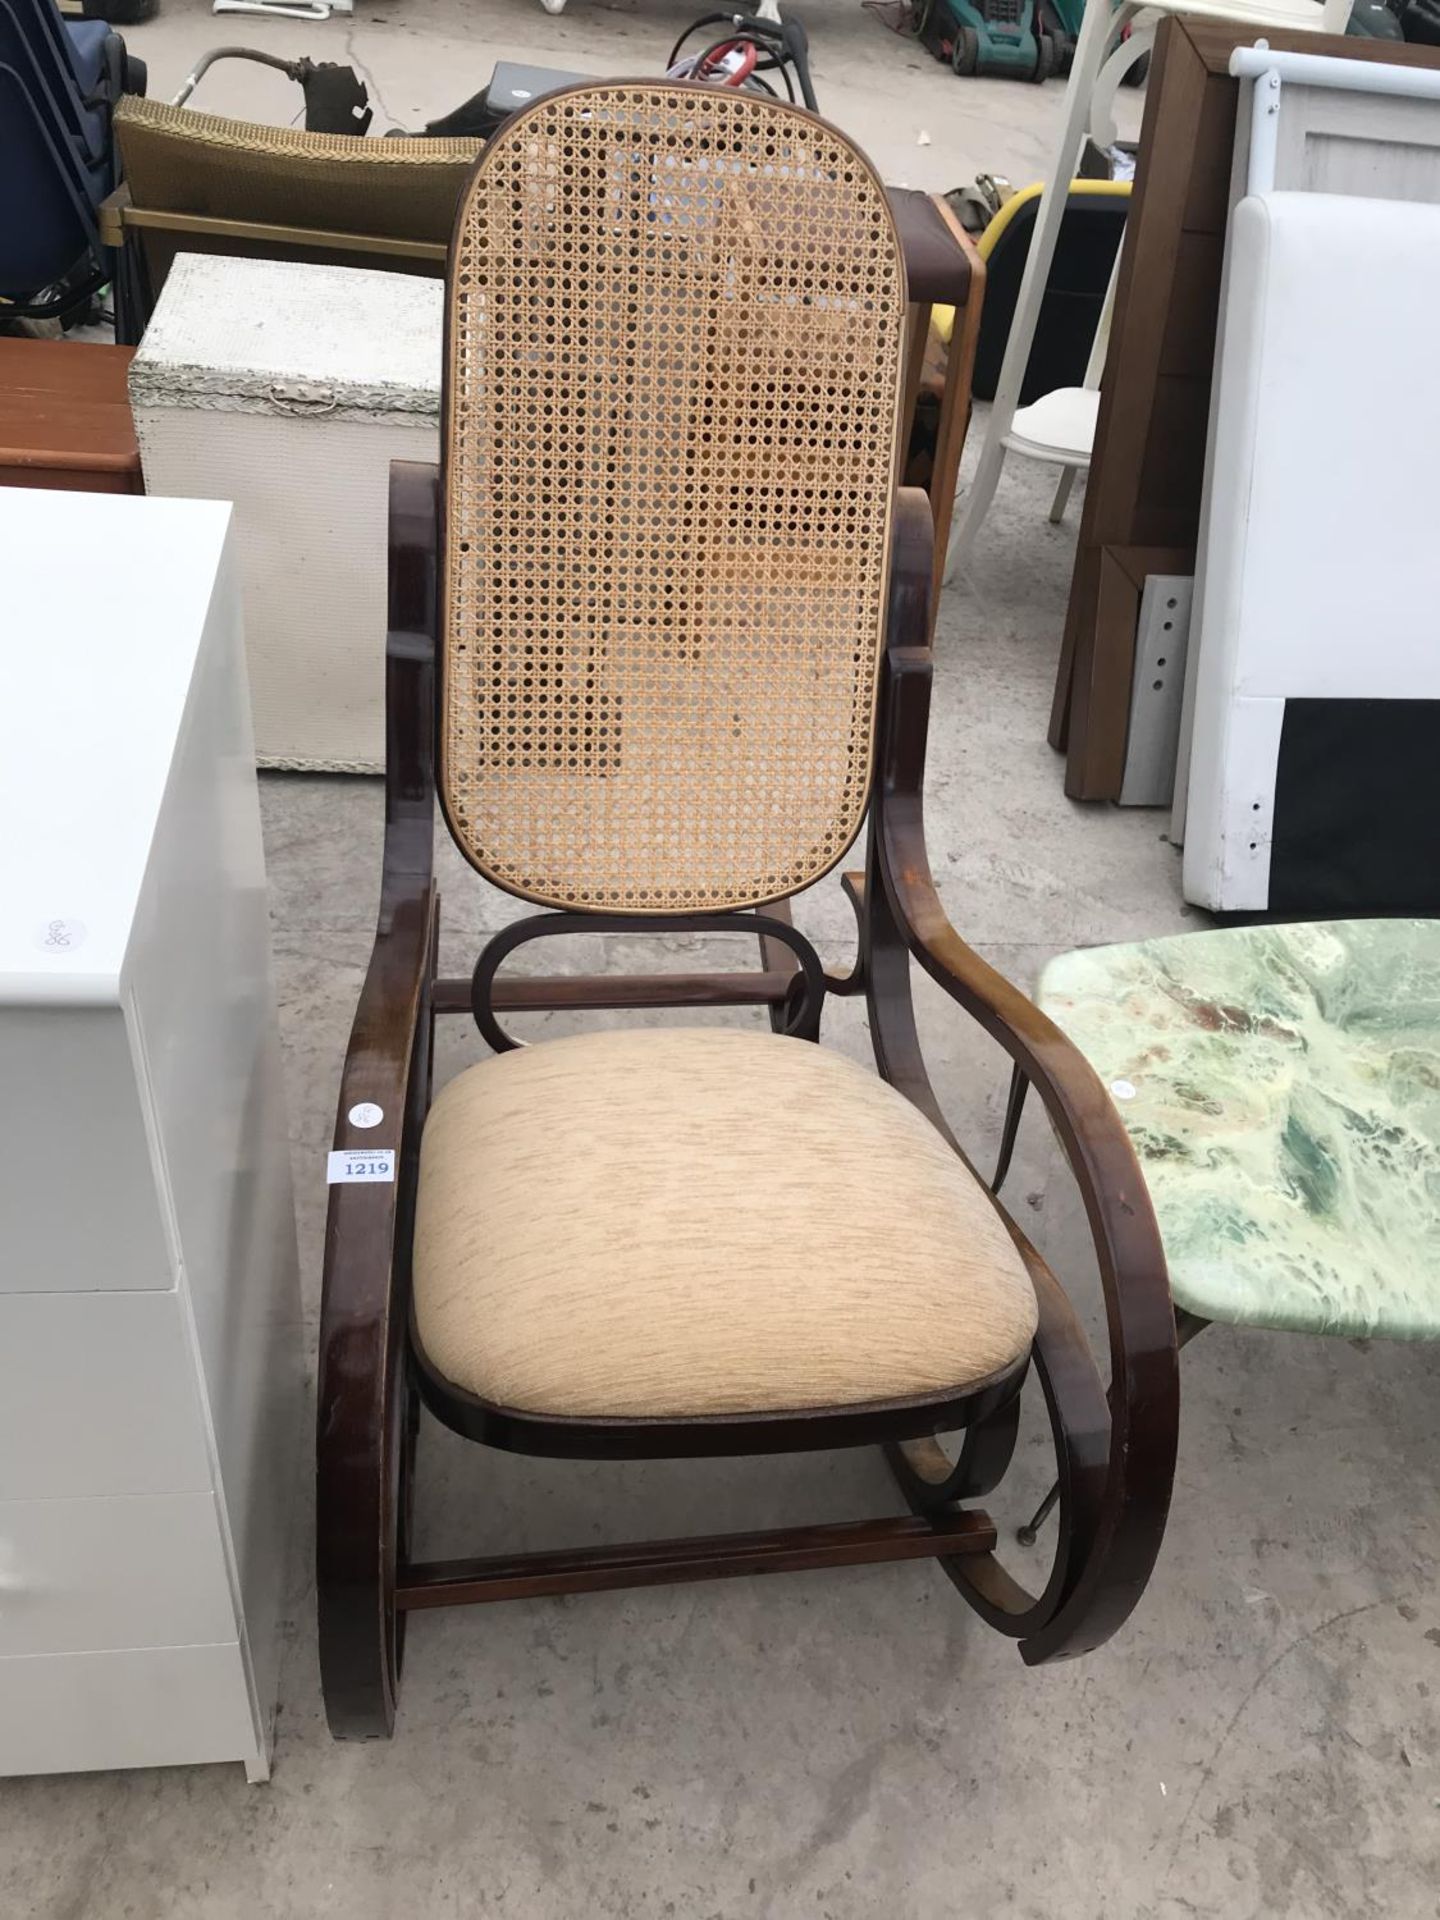 A MAHOGANY BENTWOOD ROCKING CHAIR WITH RATTAN BACK AND UPHOLSTERED SEAT